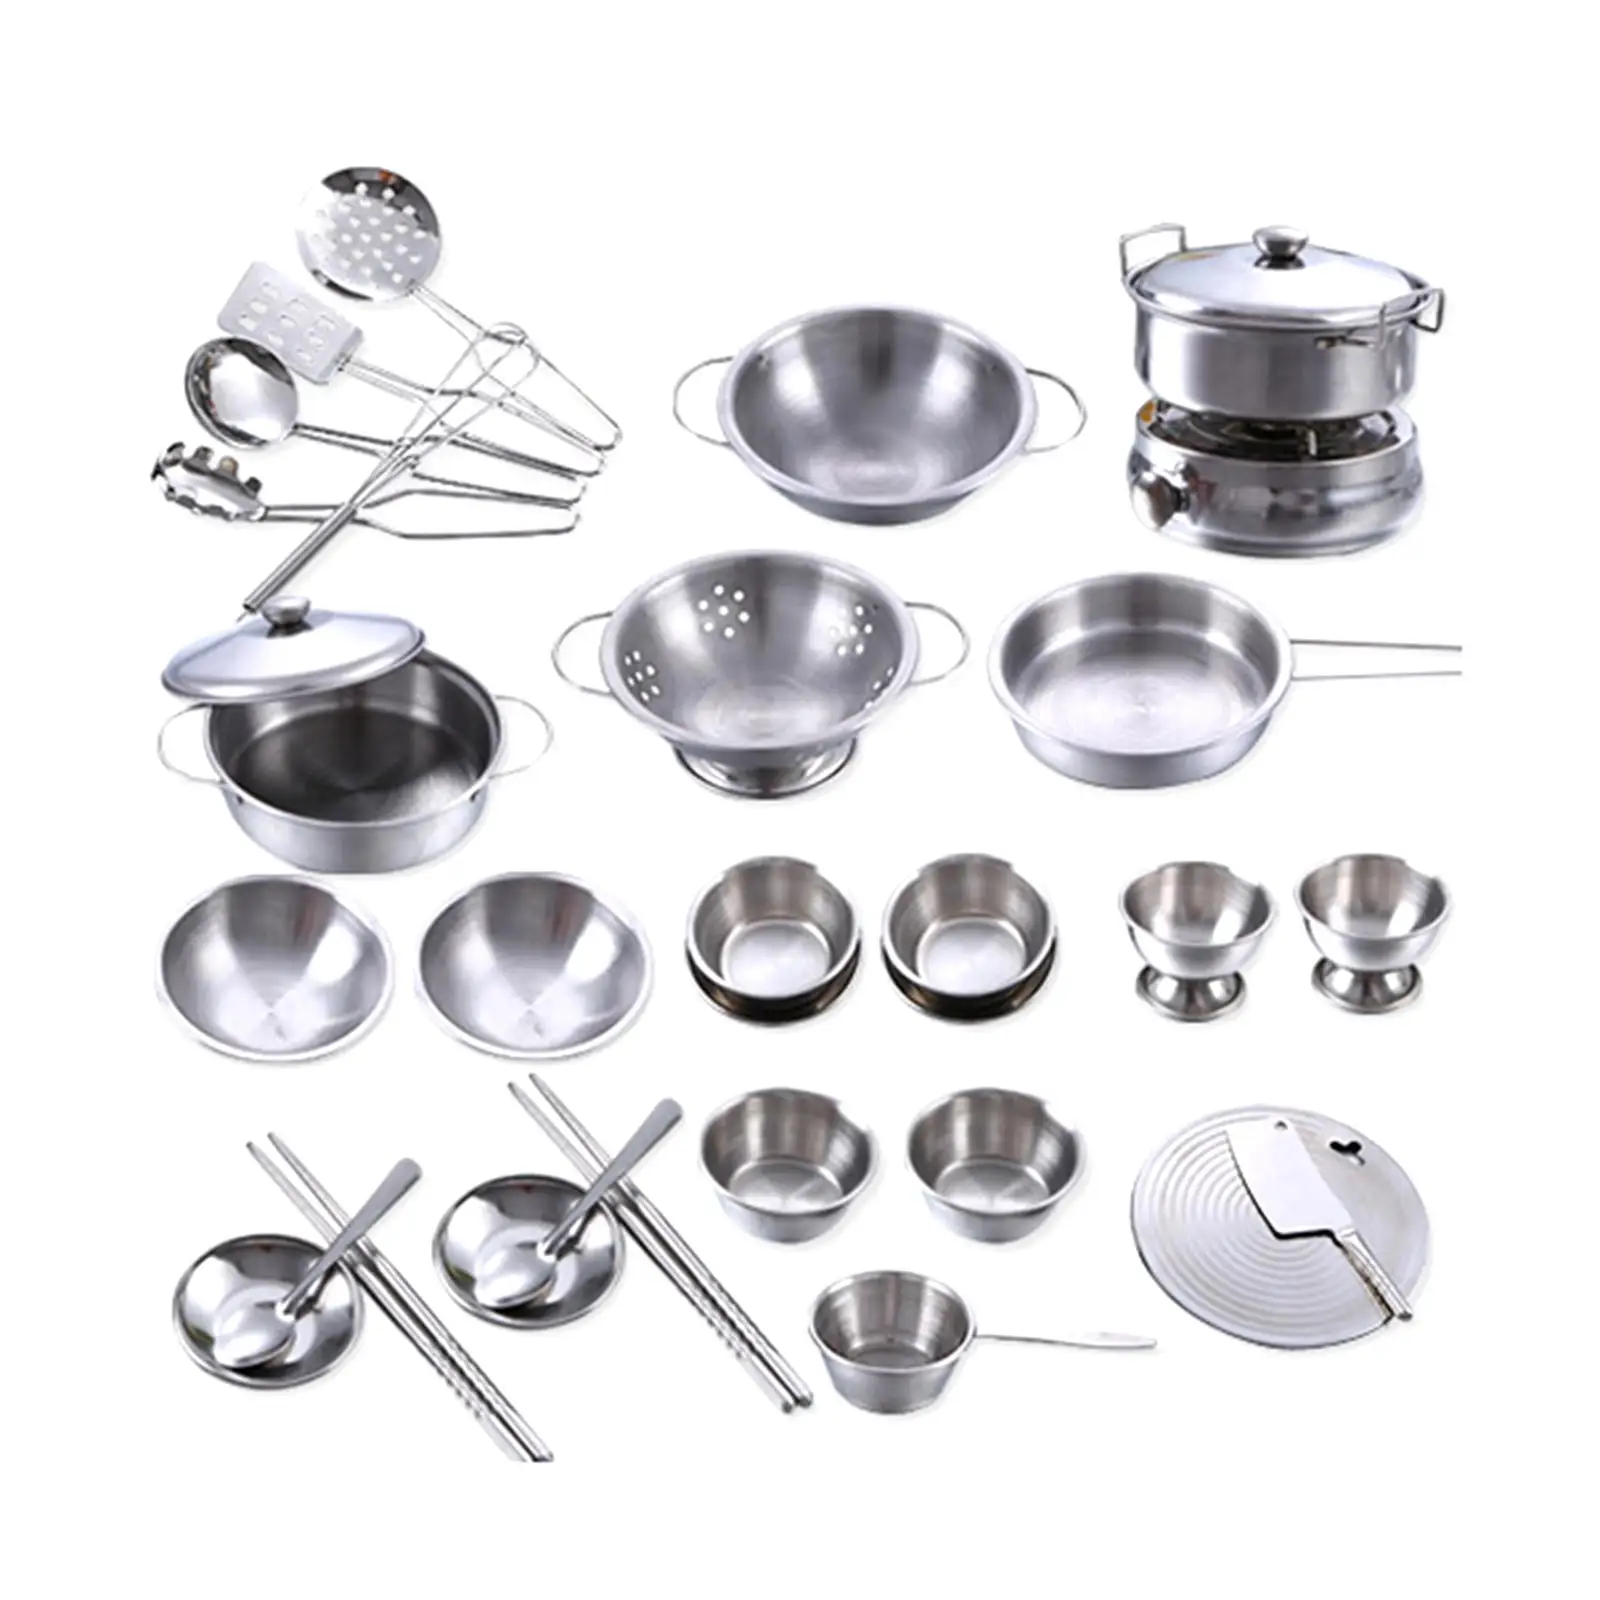 25Pcs Kitchen Pretend Toys Cooking Utensils Stainless Steel for Aged 3 Years and up Mini Pots Pans Polished Development Toys